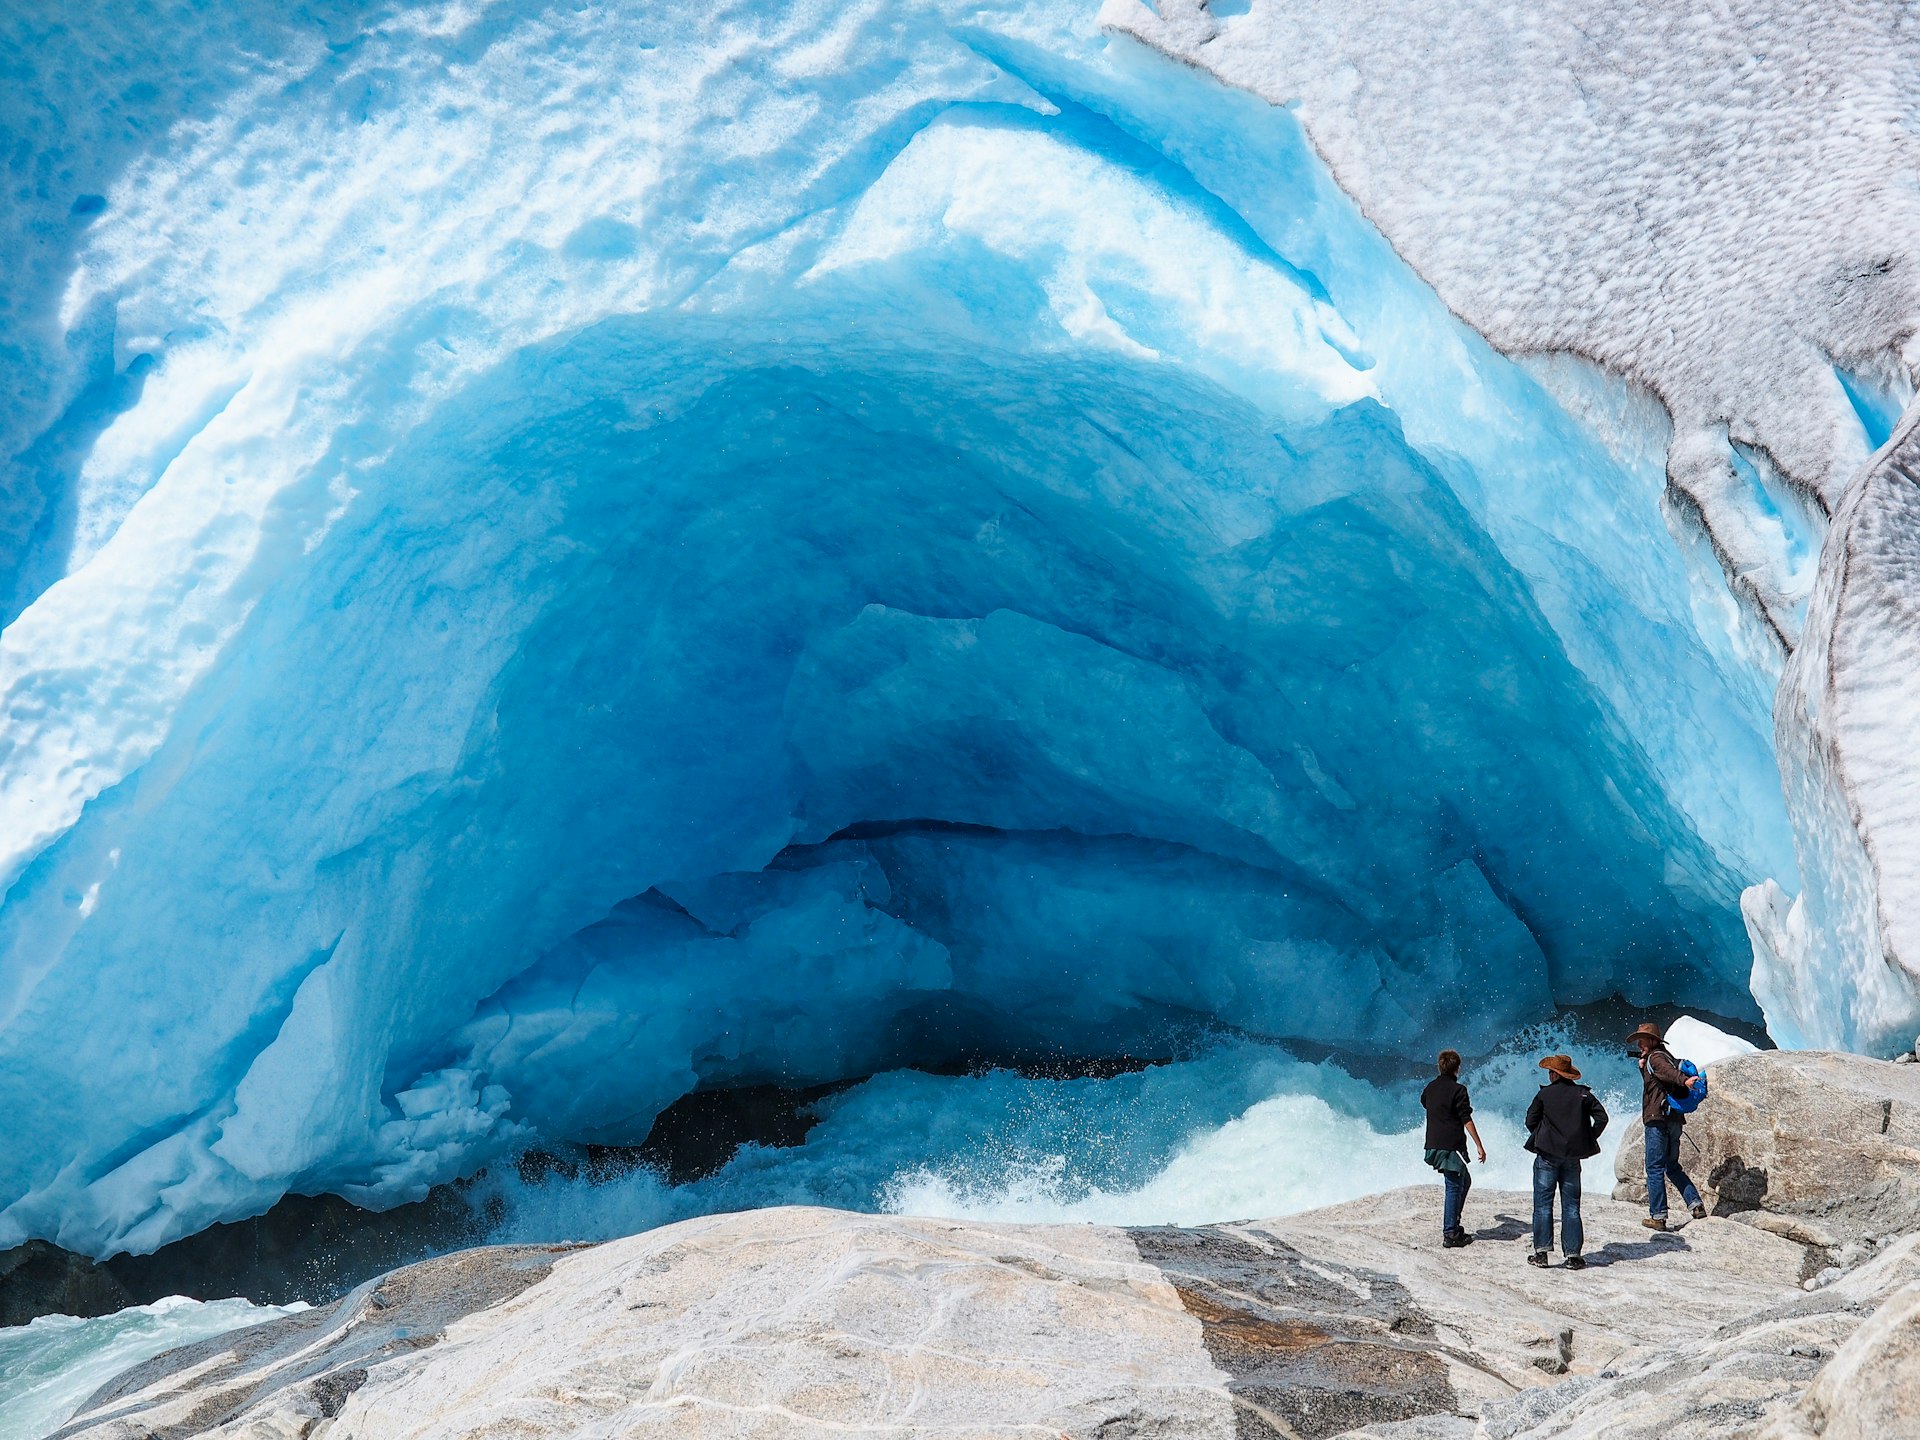 Three people stand looking into a blue-white ice cave, part of a glacier